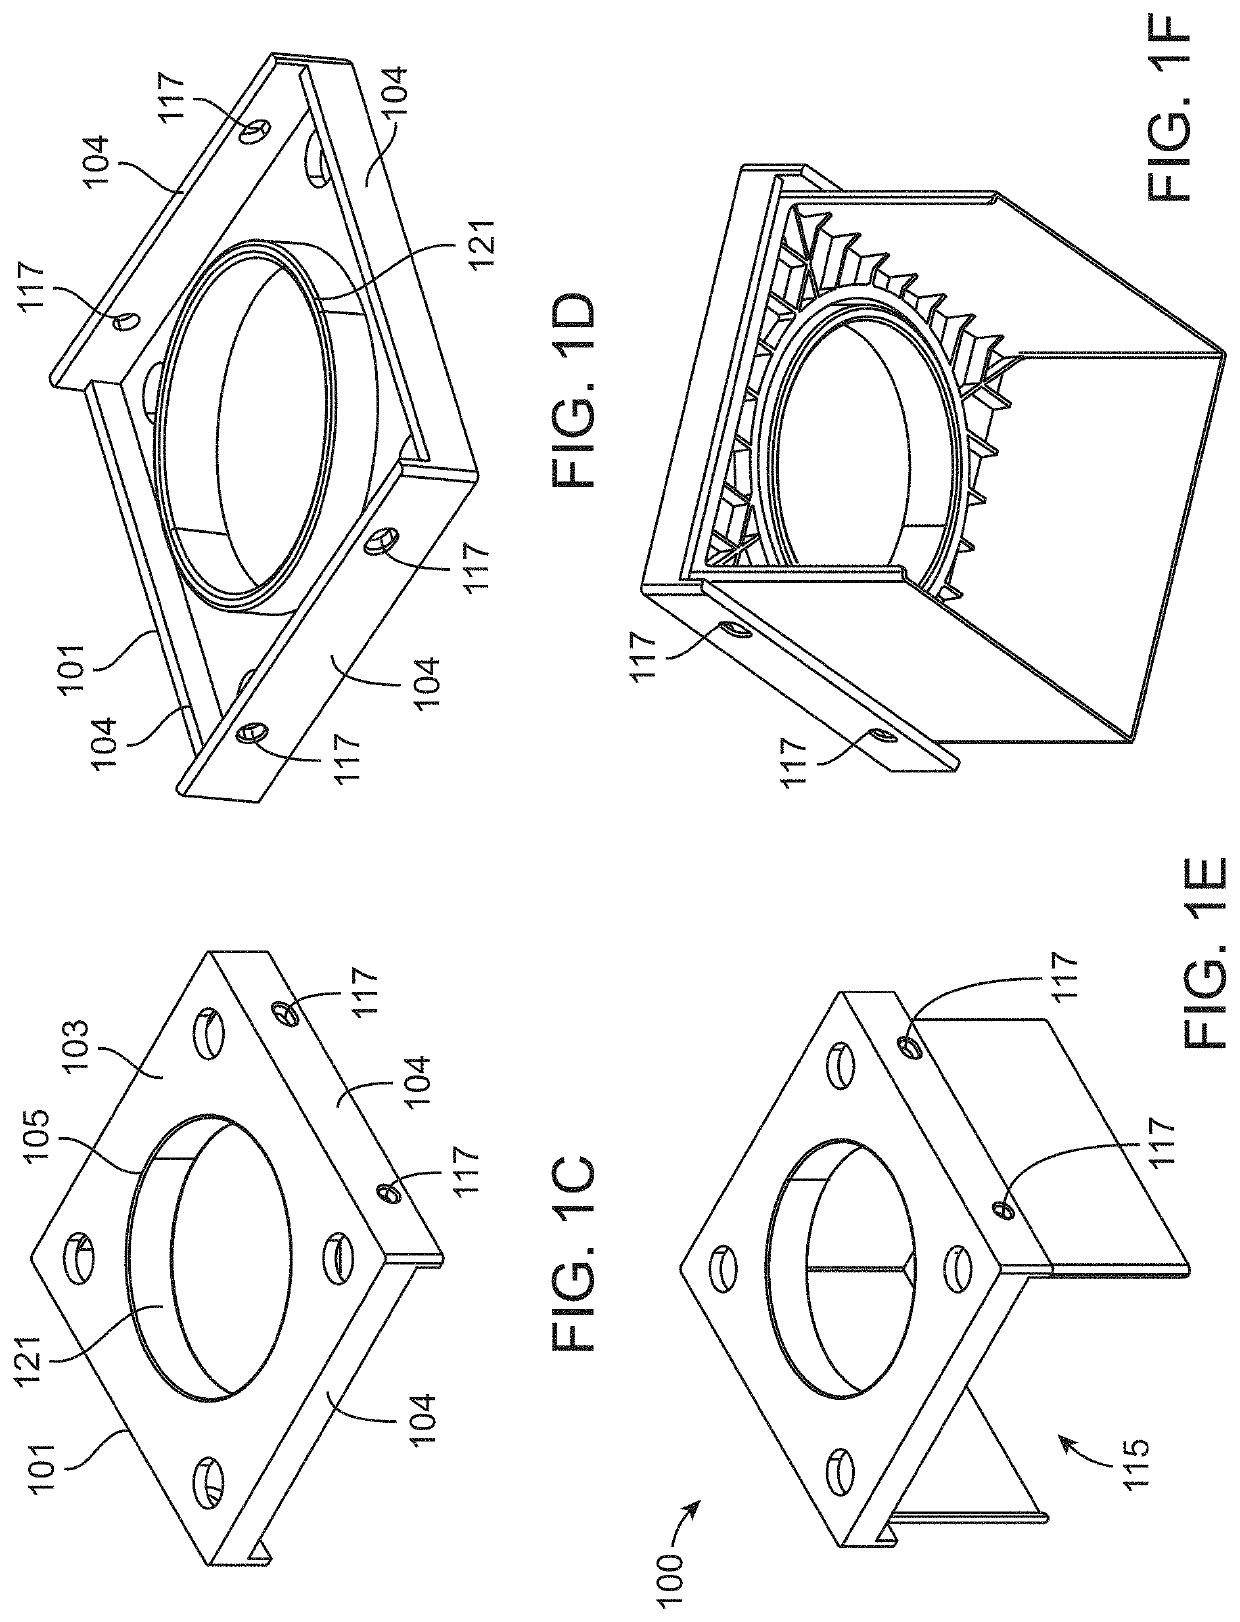 Systems and methods for packaging articles to be embroidered